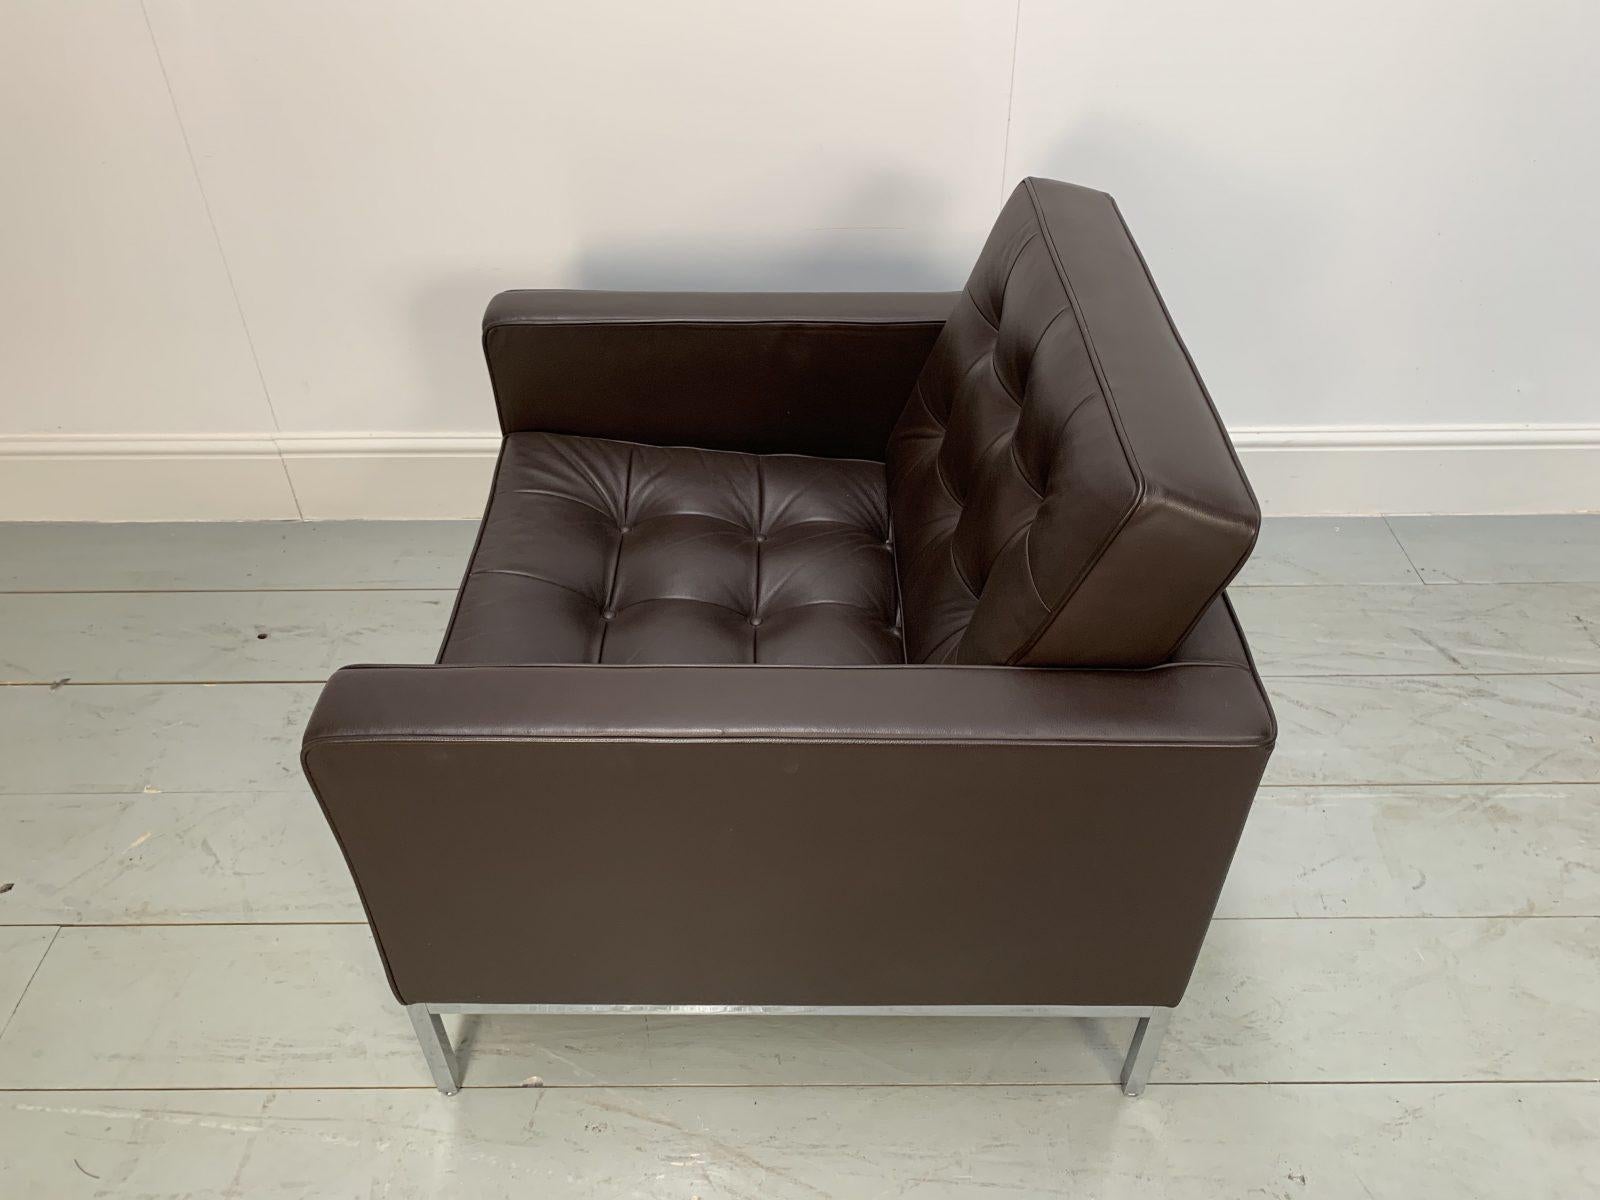 Contemporary Knoll Studio “Florence Knoll” Lounge Chair Armchair in “Sabrina” Mahogany Brown